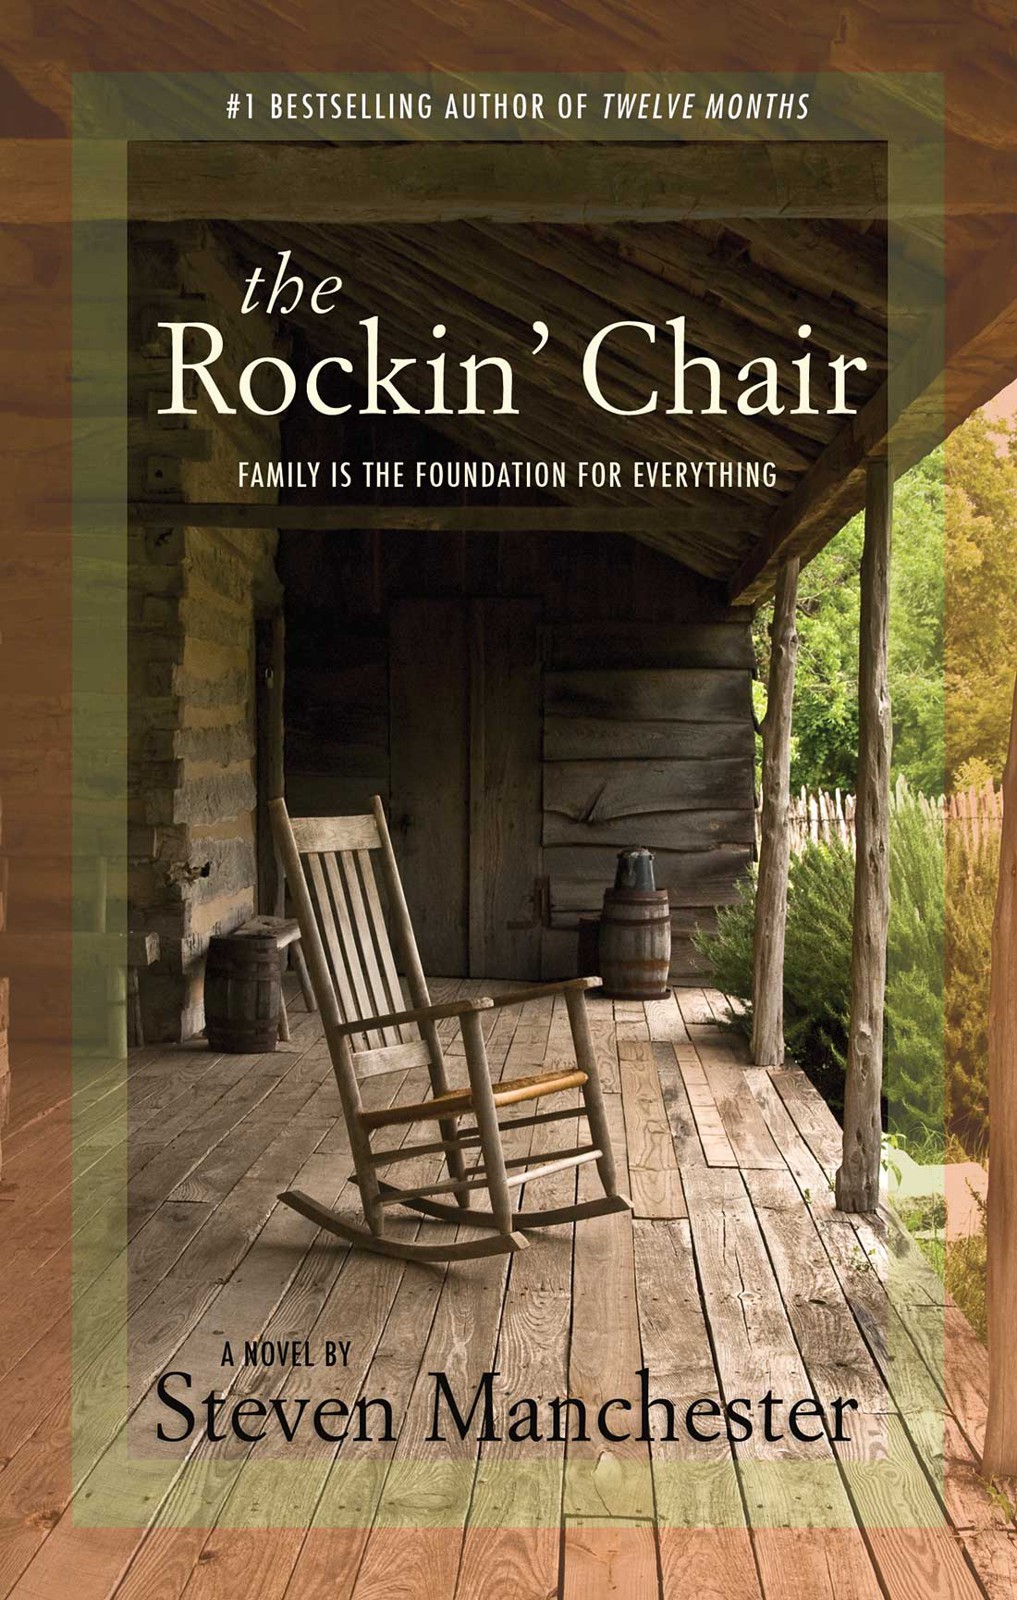 The Rockin' Chair by Steven Manchester